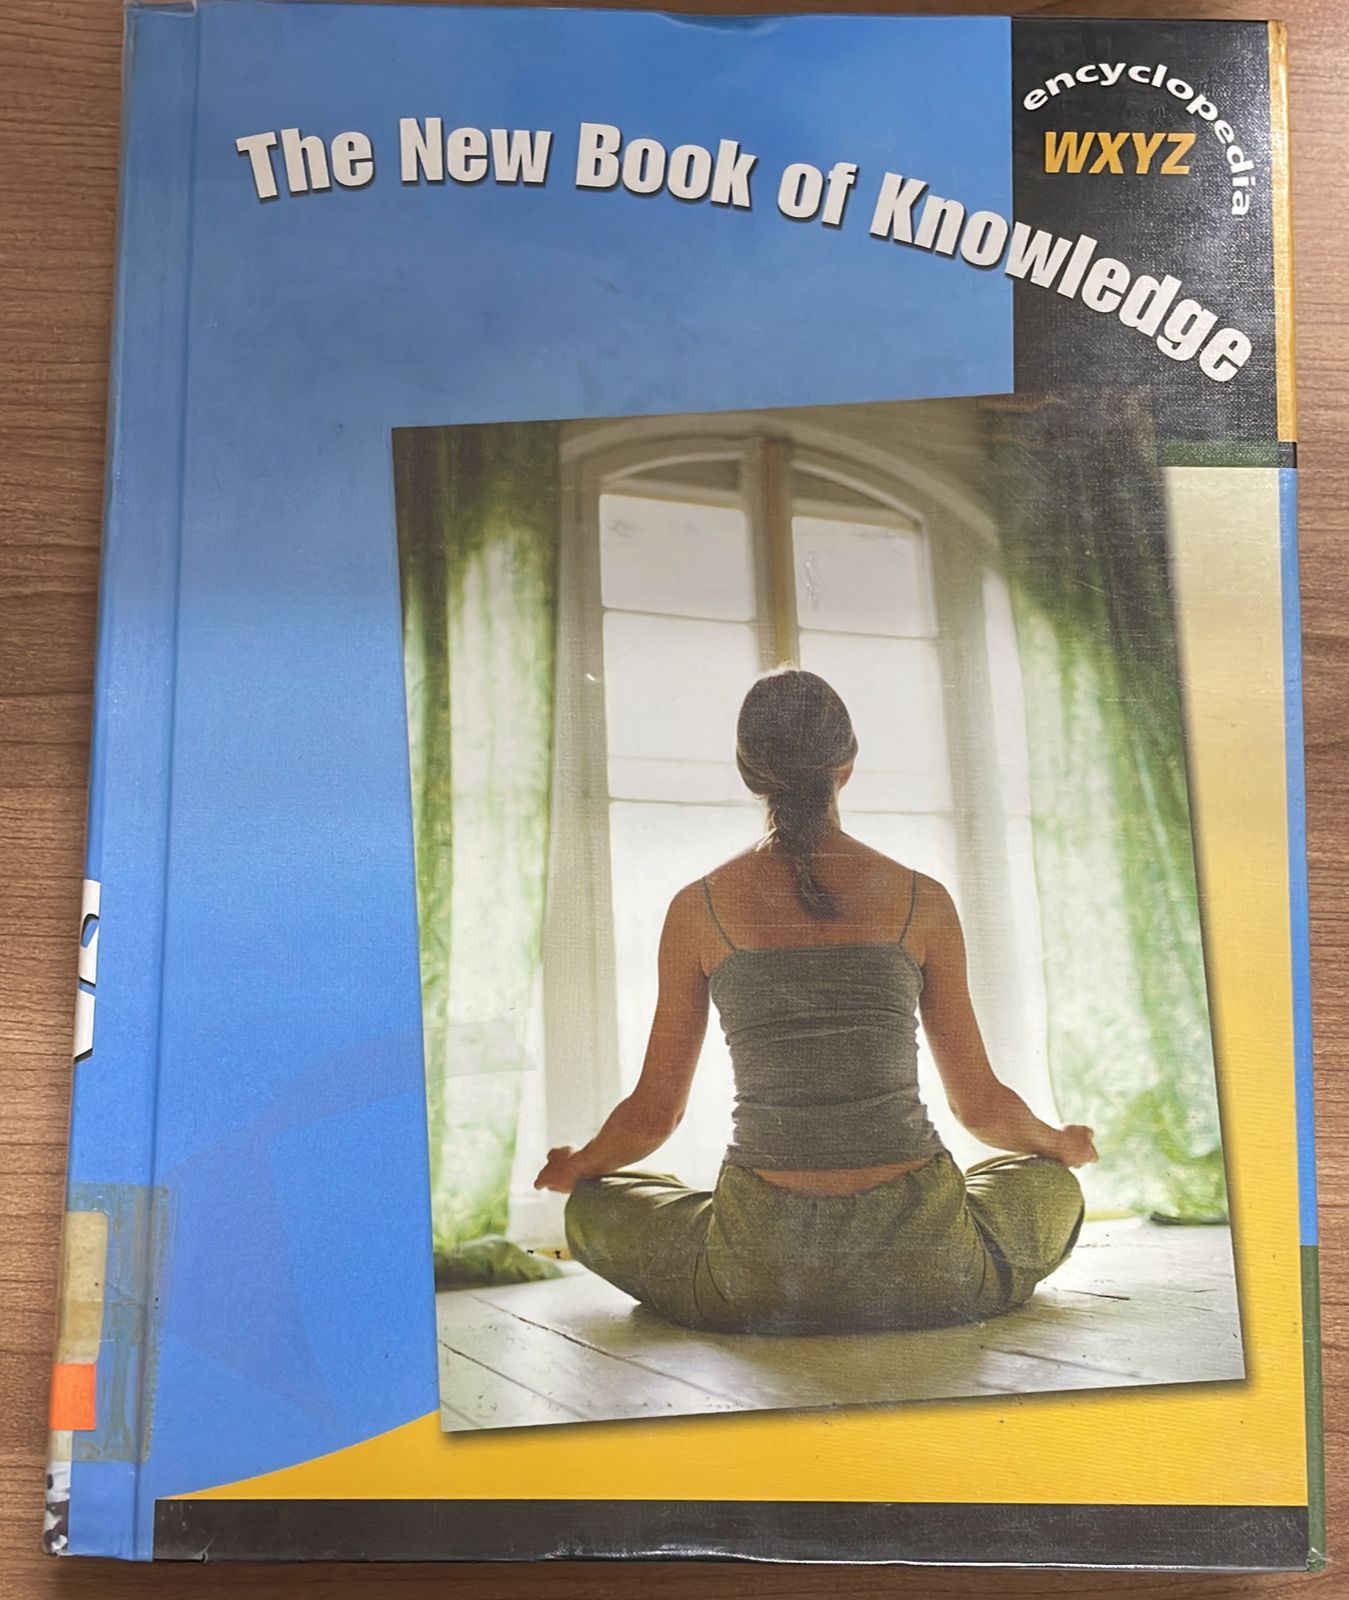 The New Book of Knowledge :  Volume 20 W-X-Y-Z